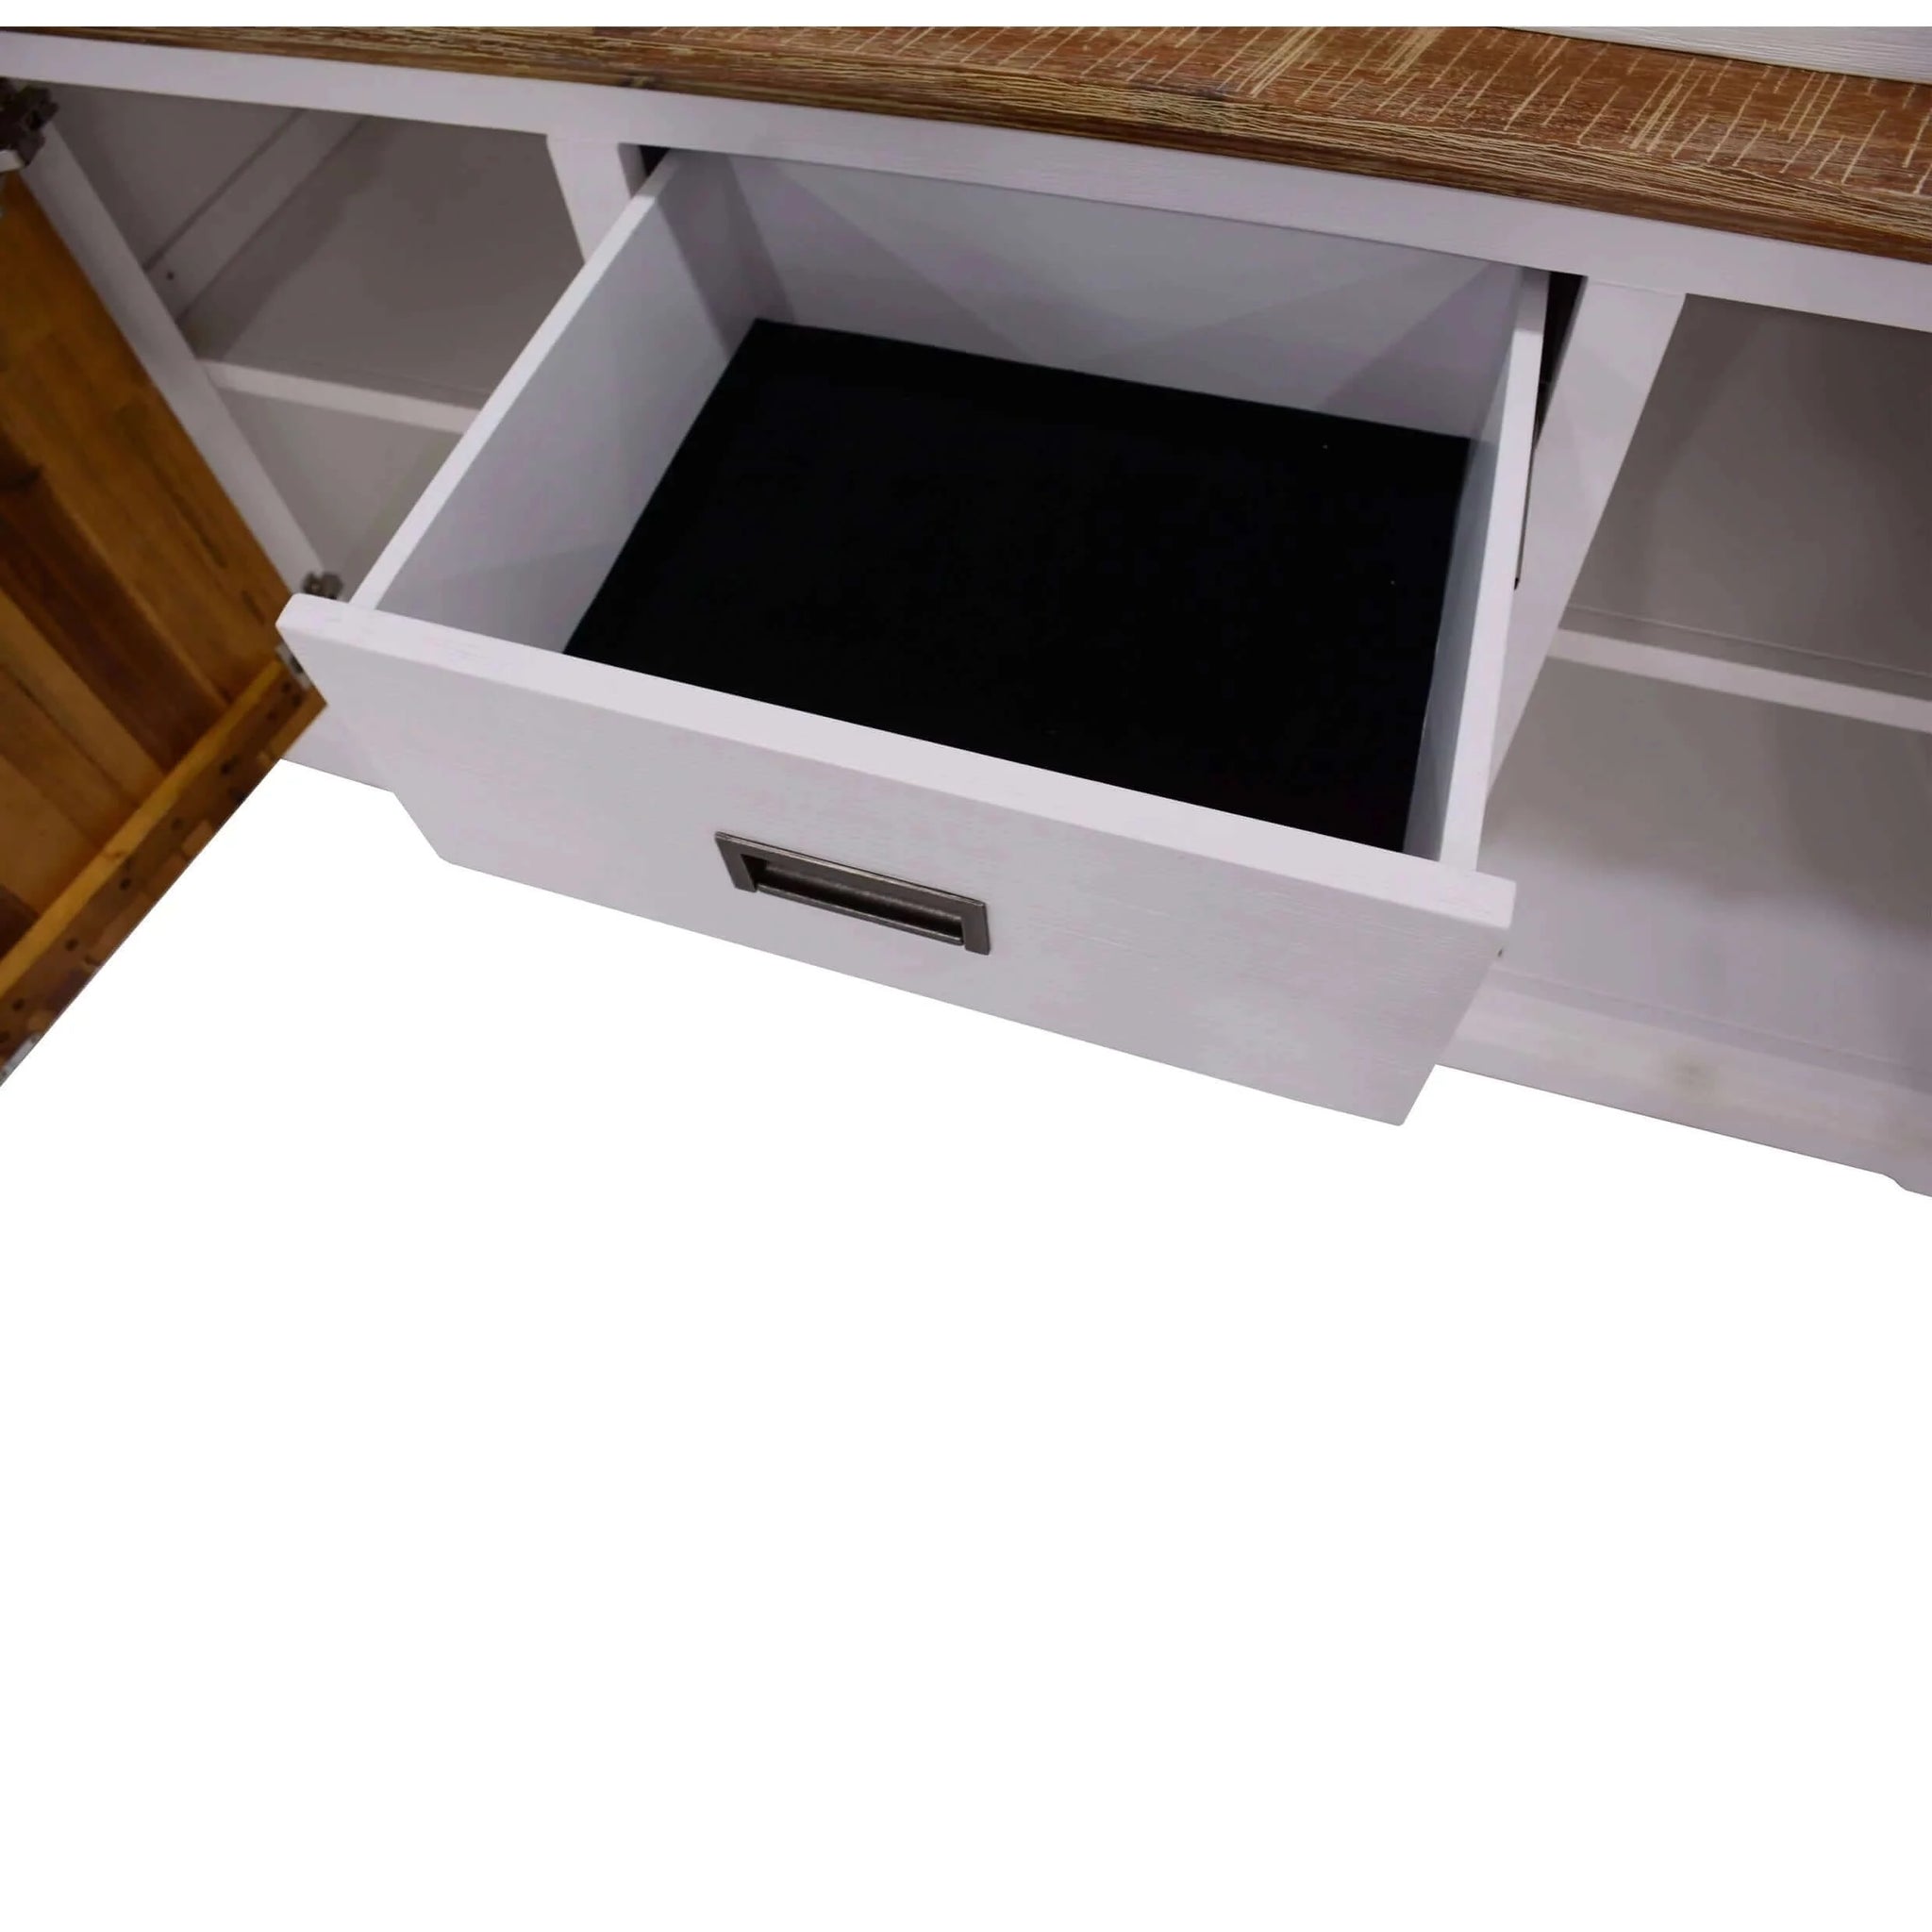 Buy orville buffet table 166cm 2 door 3 drawer solid acacia timber wood -multi color - upinteriors-Upinteriors